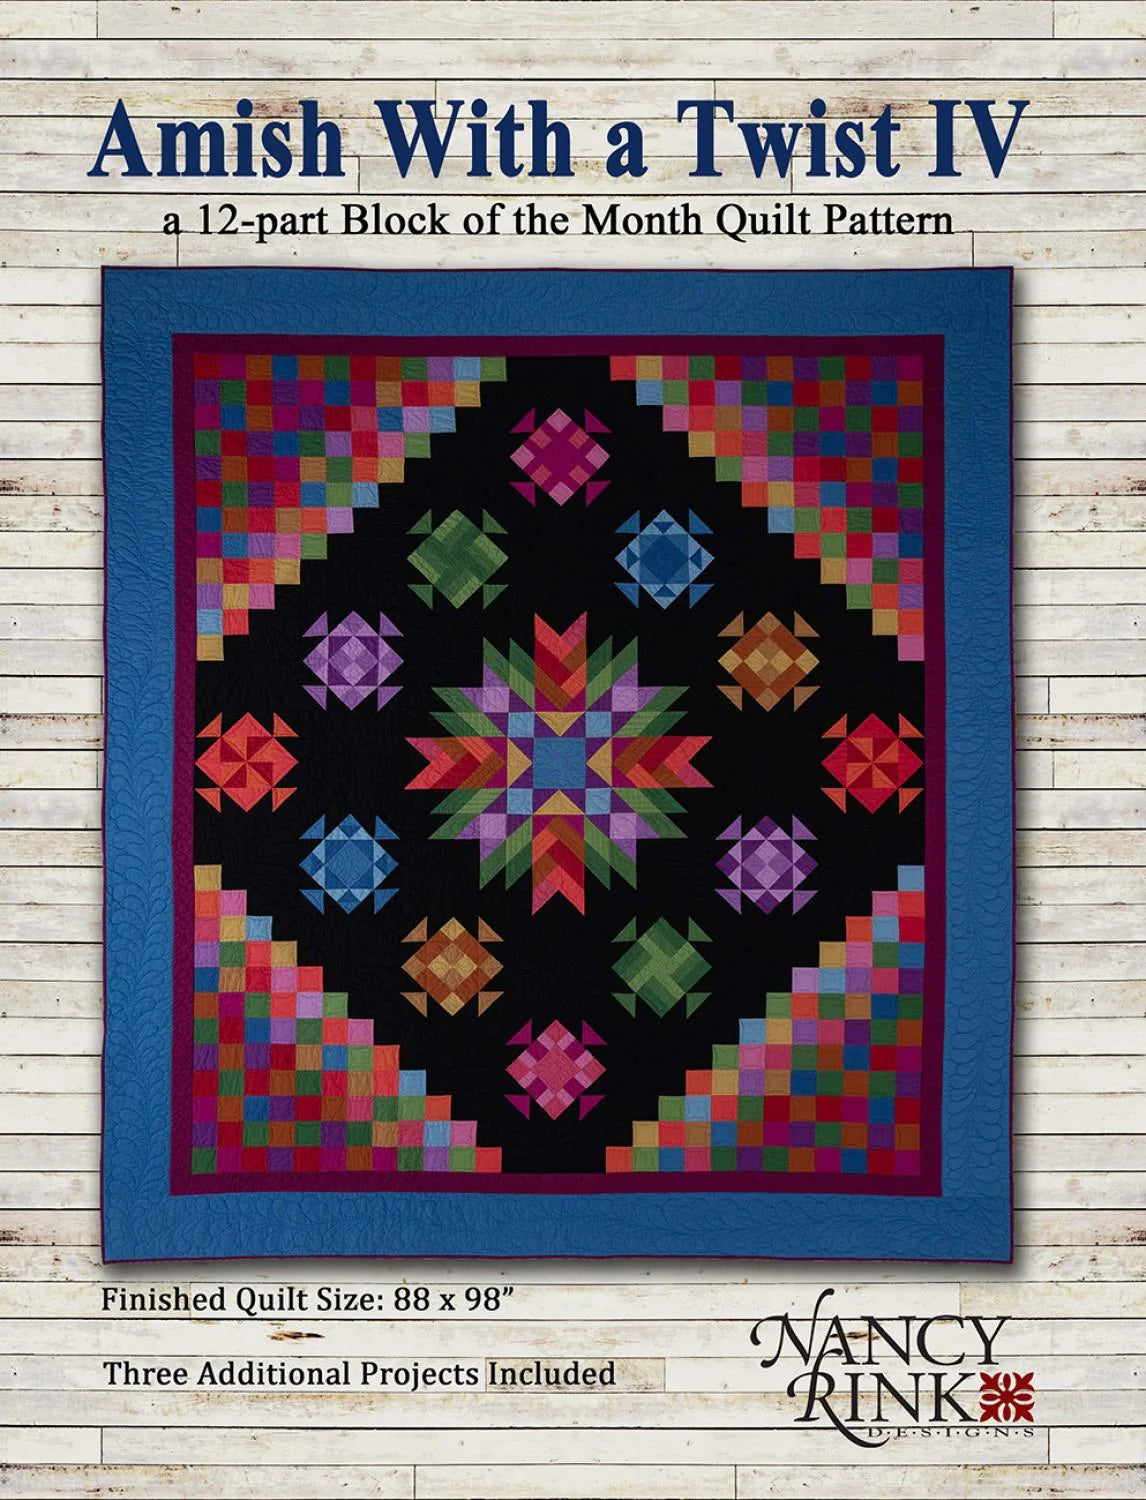 Amish With a Twist IV - Block of the Month Quilt Pattern and Kit